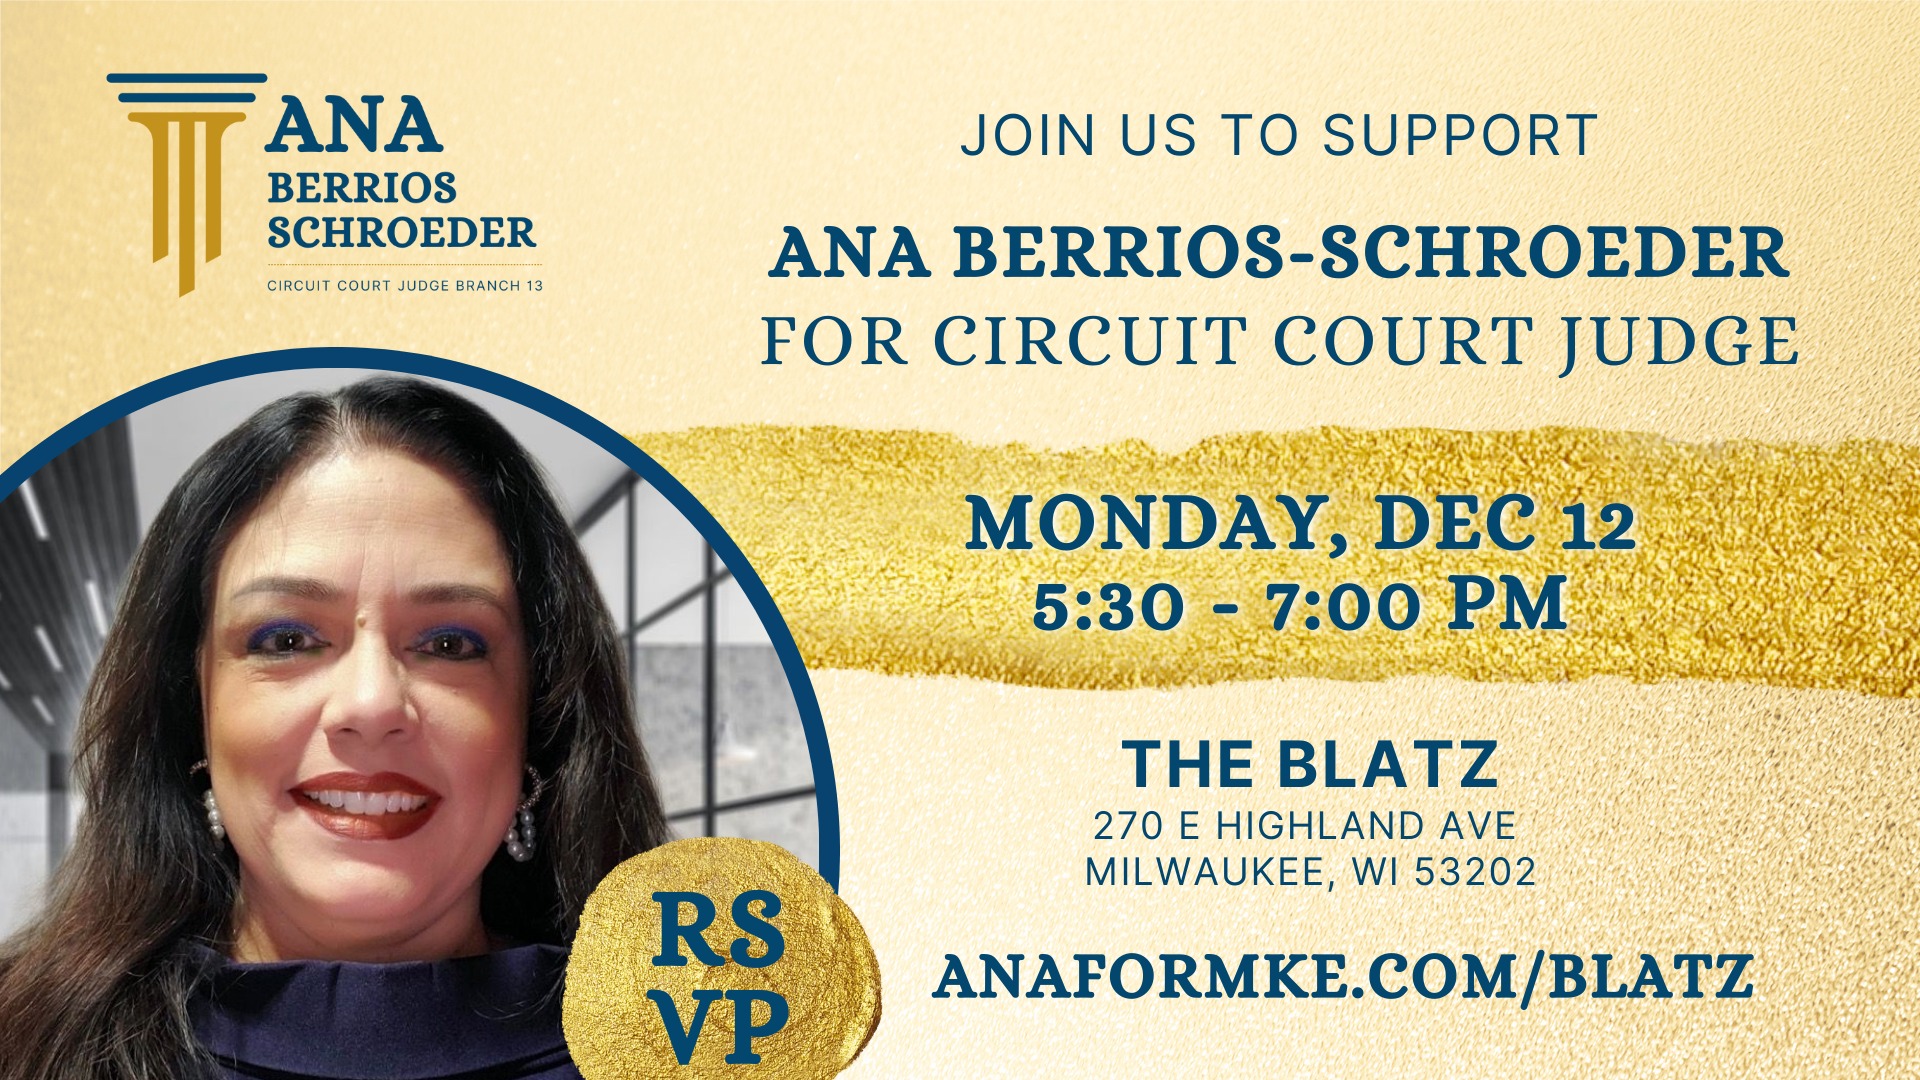 Join us for a reception to support Ana Berrios-Schroeder for Judge!